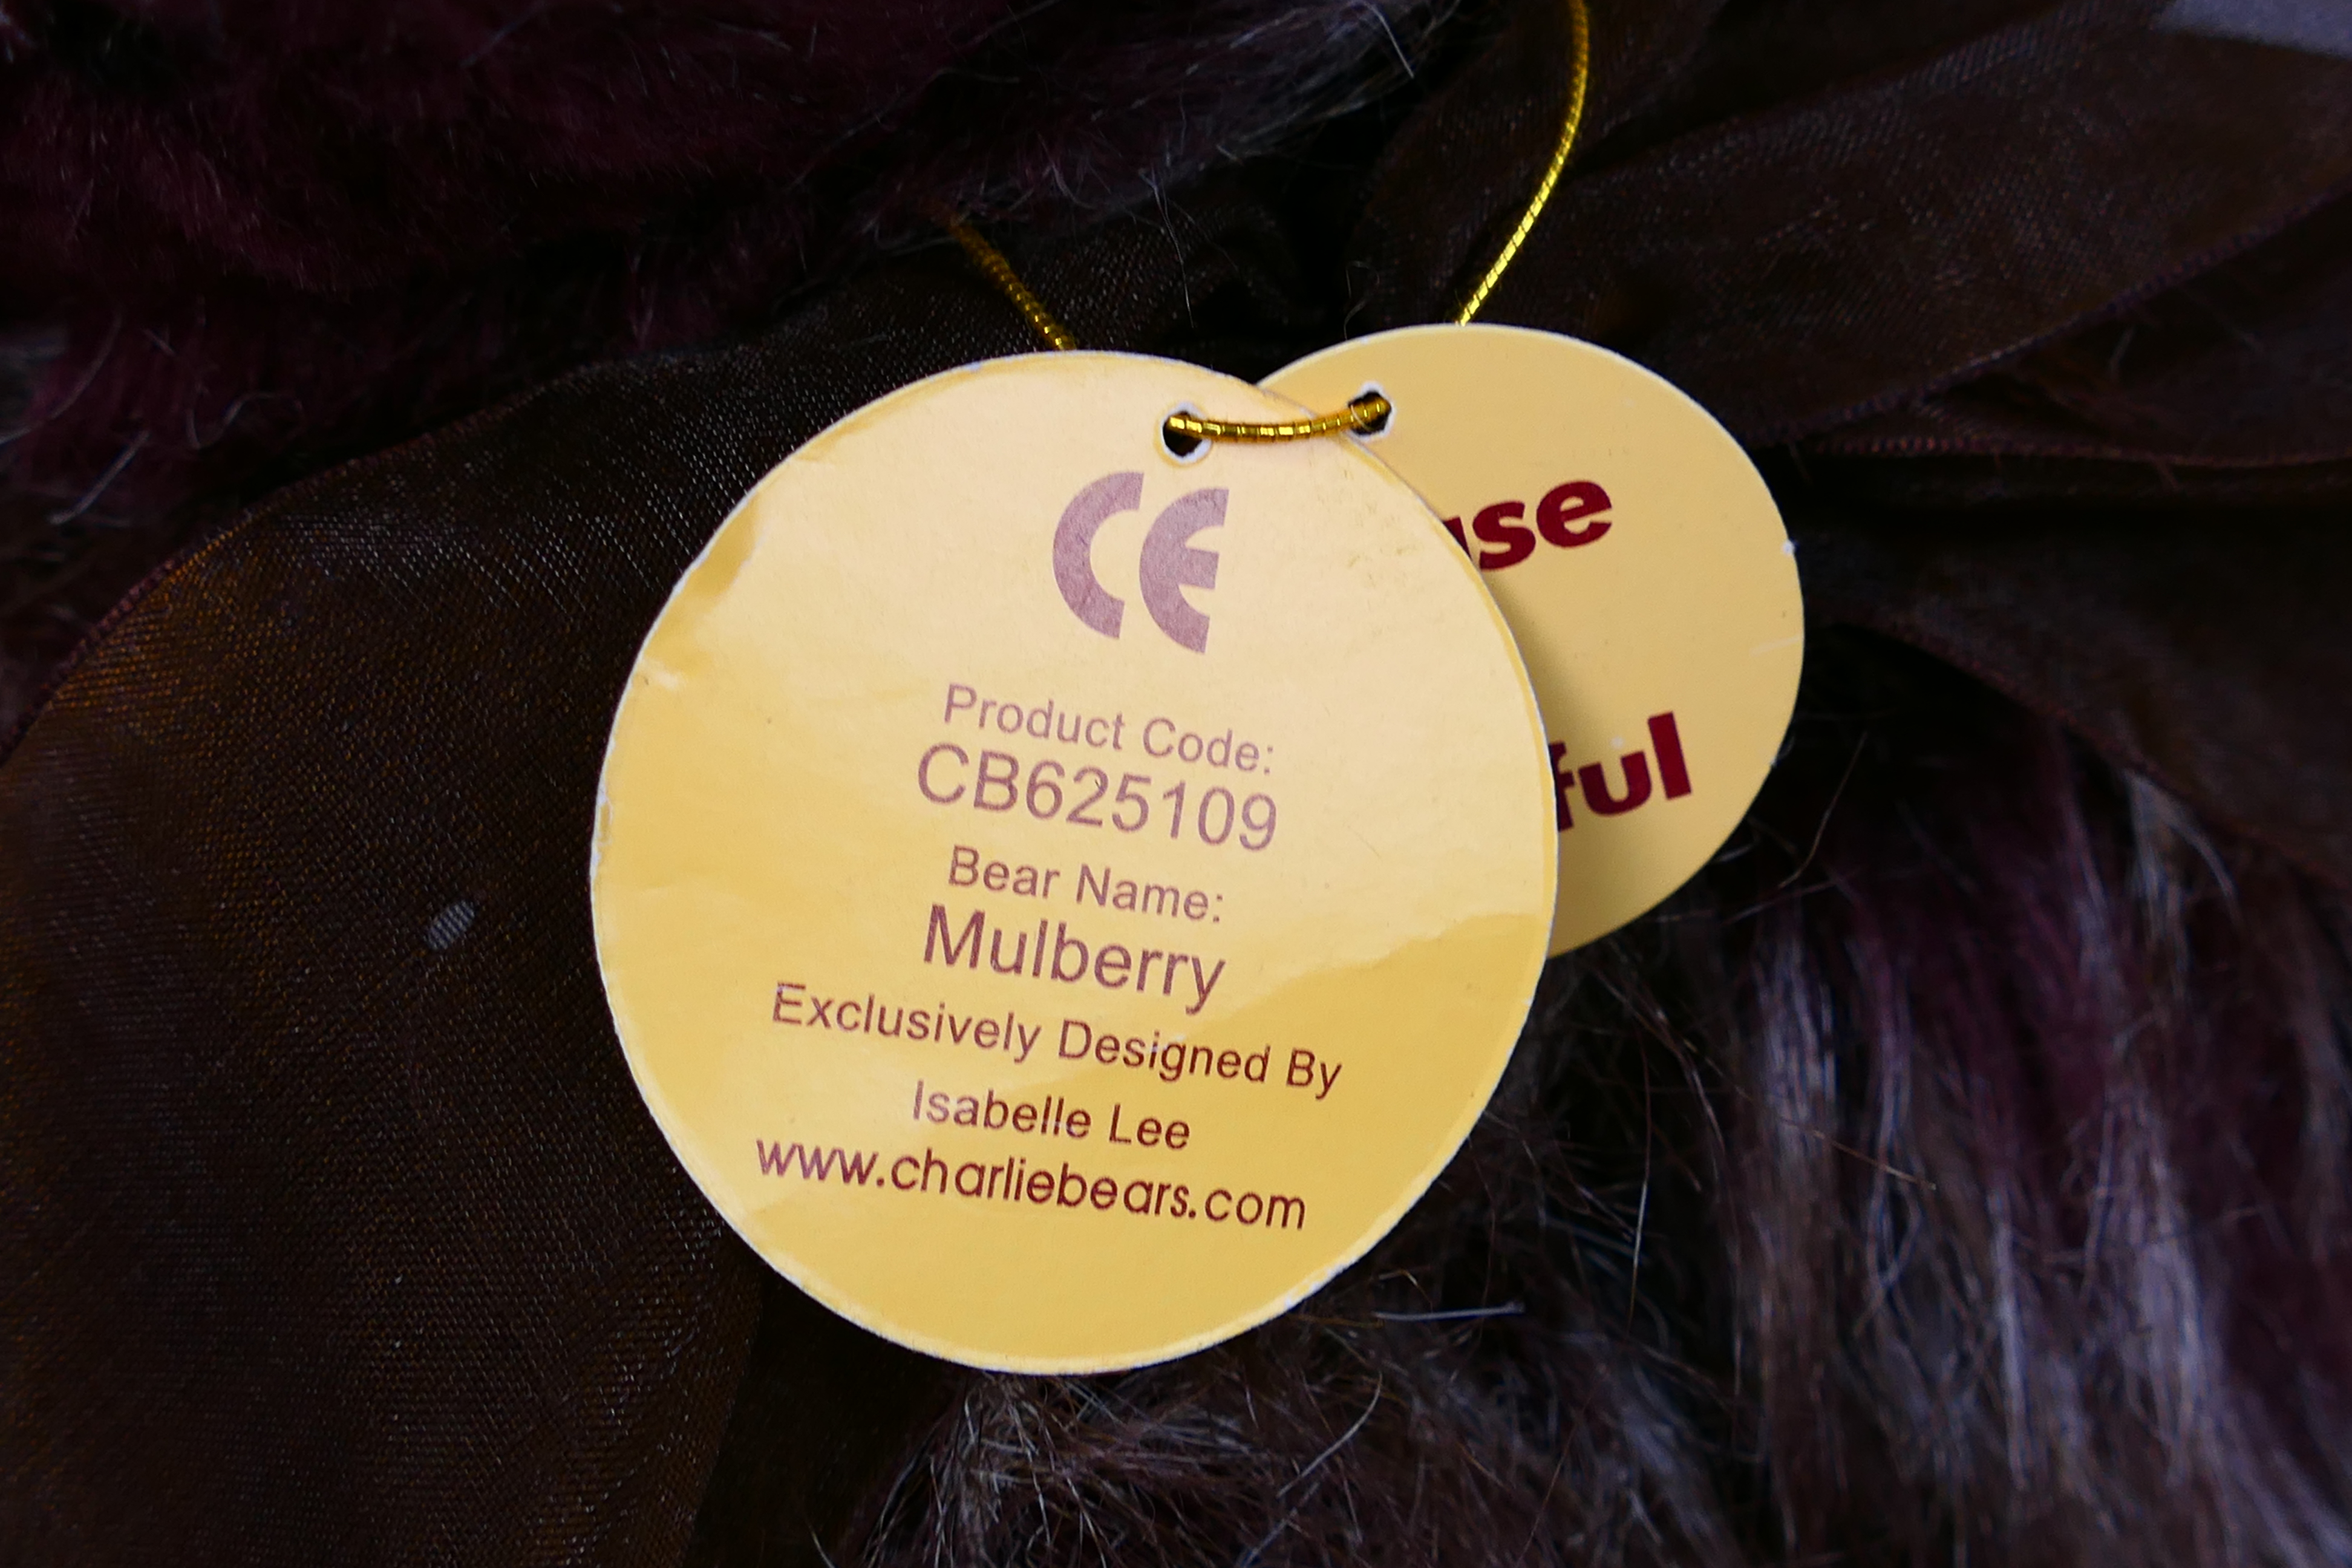 Charlie Bear - Plush - A Charlie Bear Collectors Plush Named Mulberry (#CB625109) - Image 4 of 5